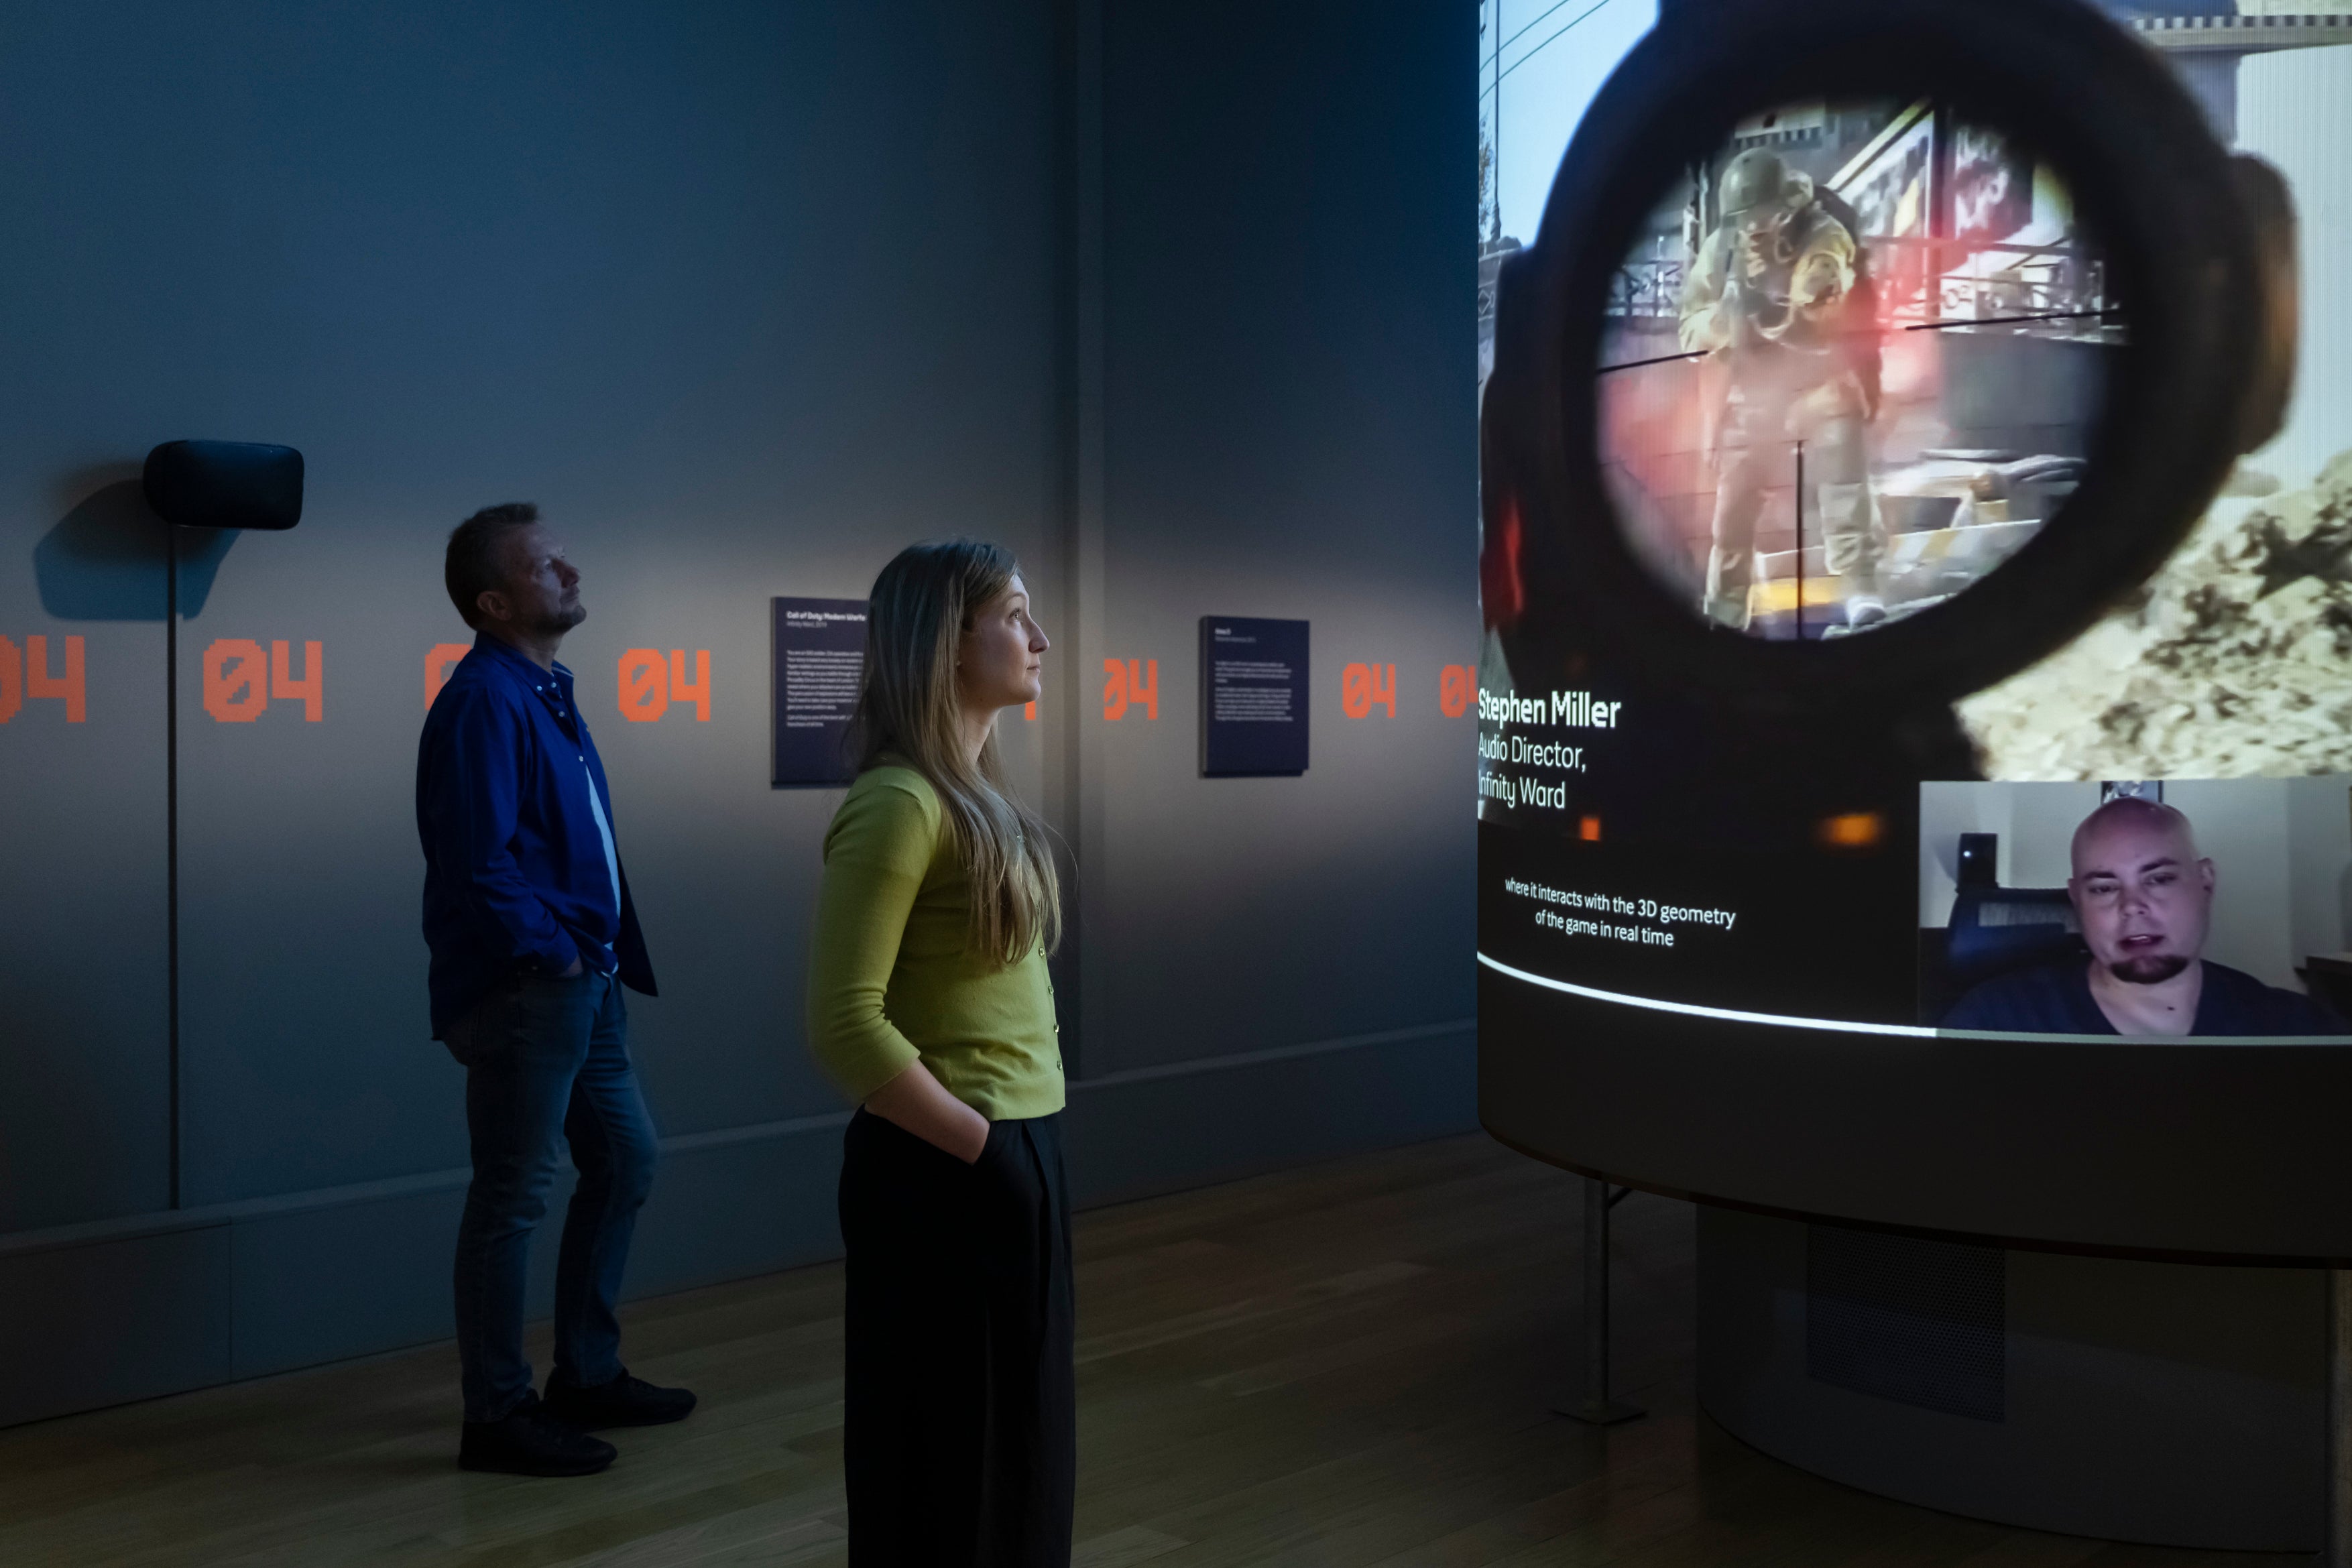 Museum visitors stare at a screenshot that shows a video game soldier bleeding in the crosshairs of a sniper scope.